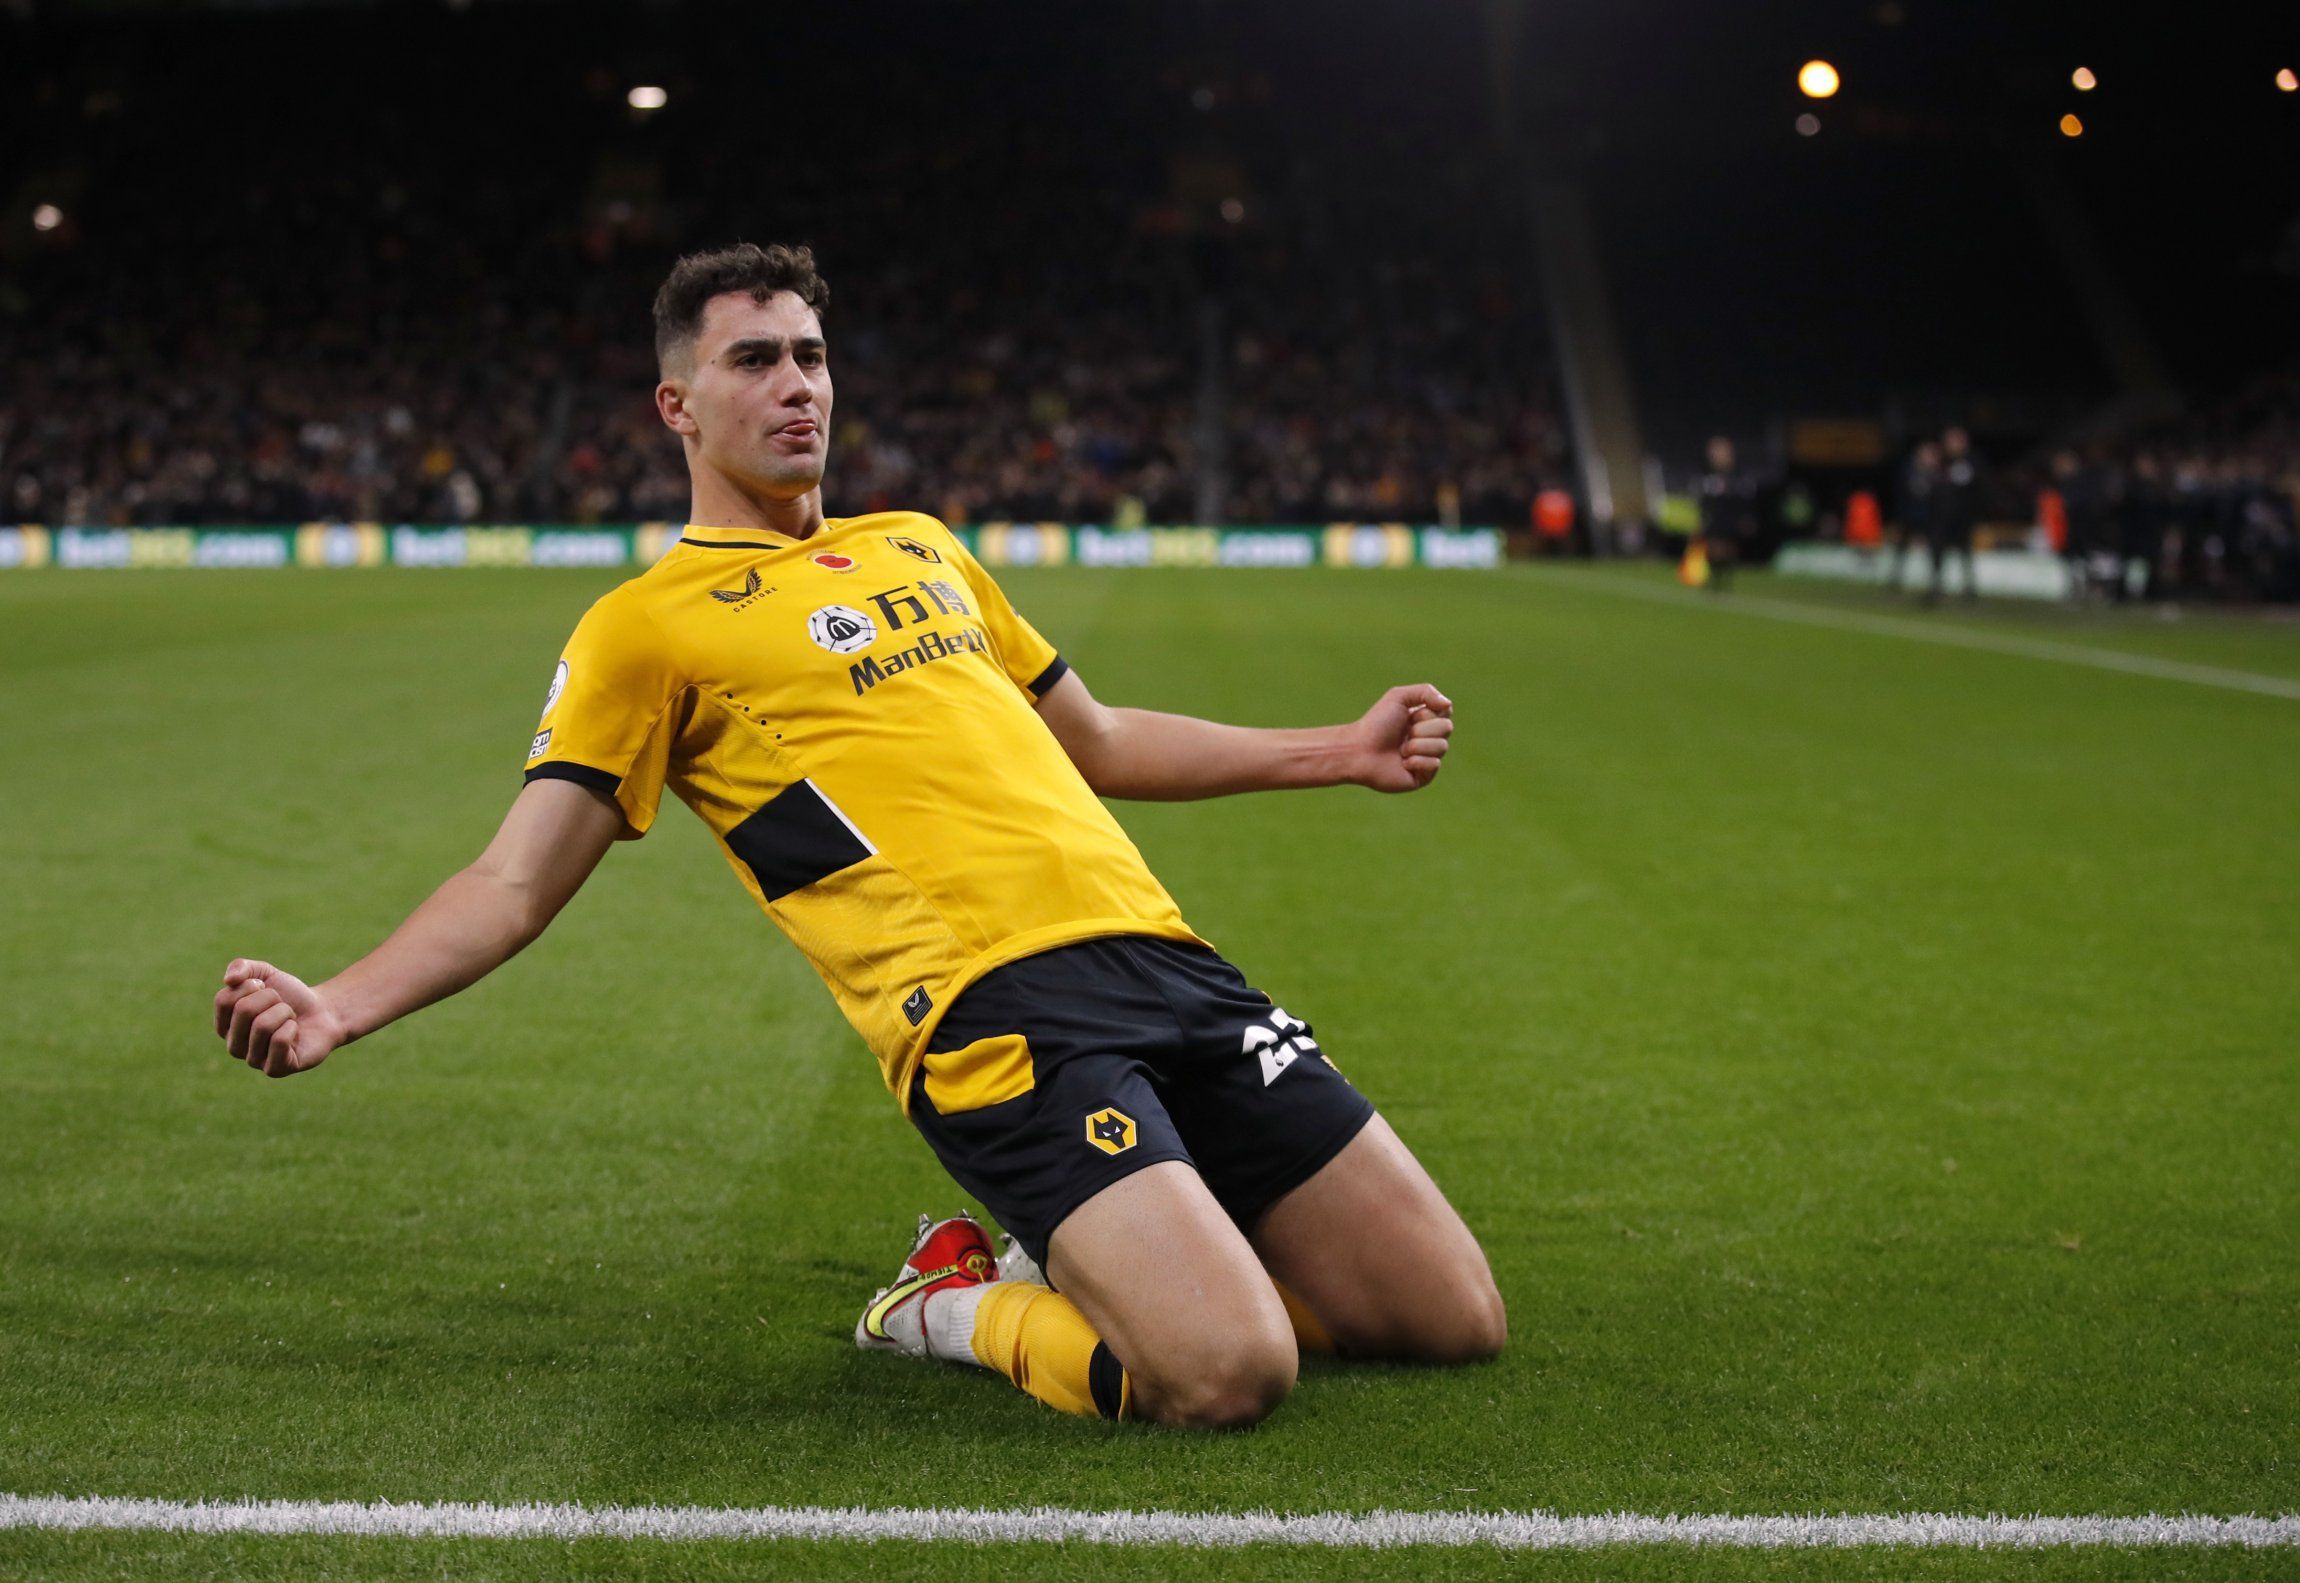 Bruno Lage, Fosun, Jeff Shi, Molineux, The Old Gold, Wolves, Wolves fans, Wolves info, Wolves latest, Wolves news, Wolves updates, WWFC, WWFC news, WWFC update, Premier League, Premier League news, Wolverhampton Wanderers, Transfer Focus, Max Kilman, Chelsea, 
